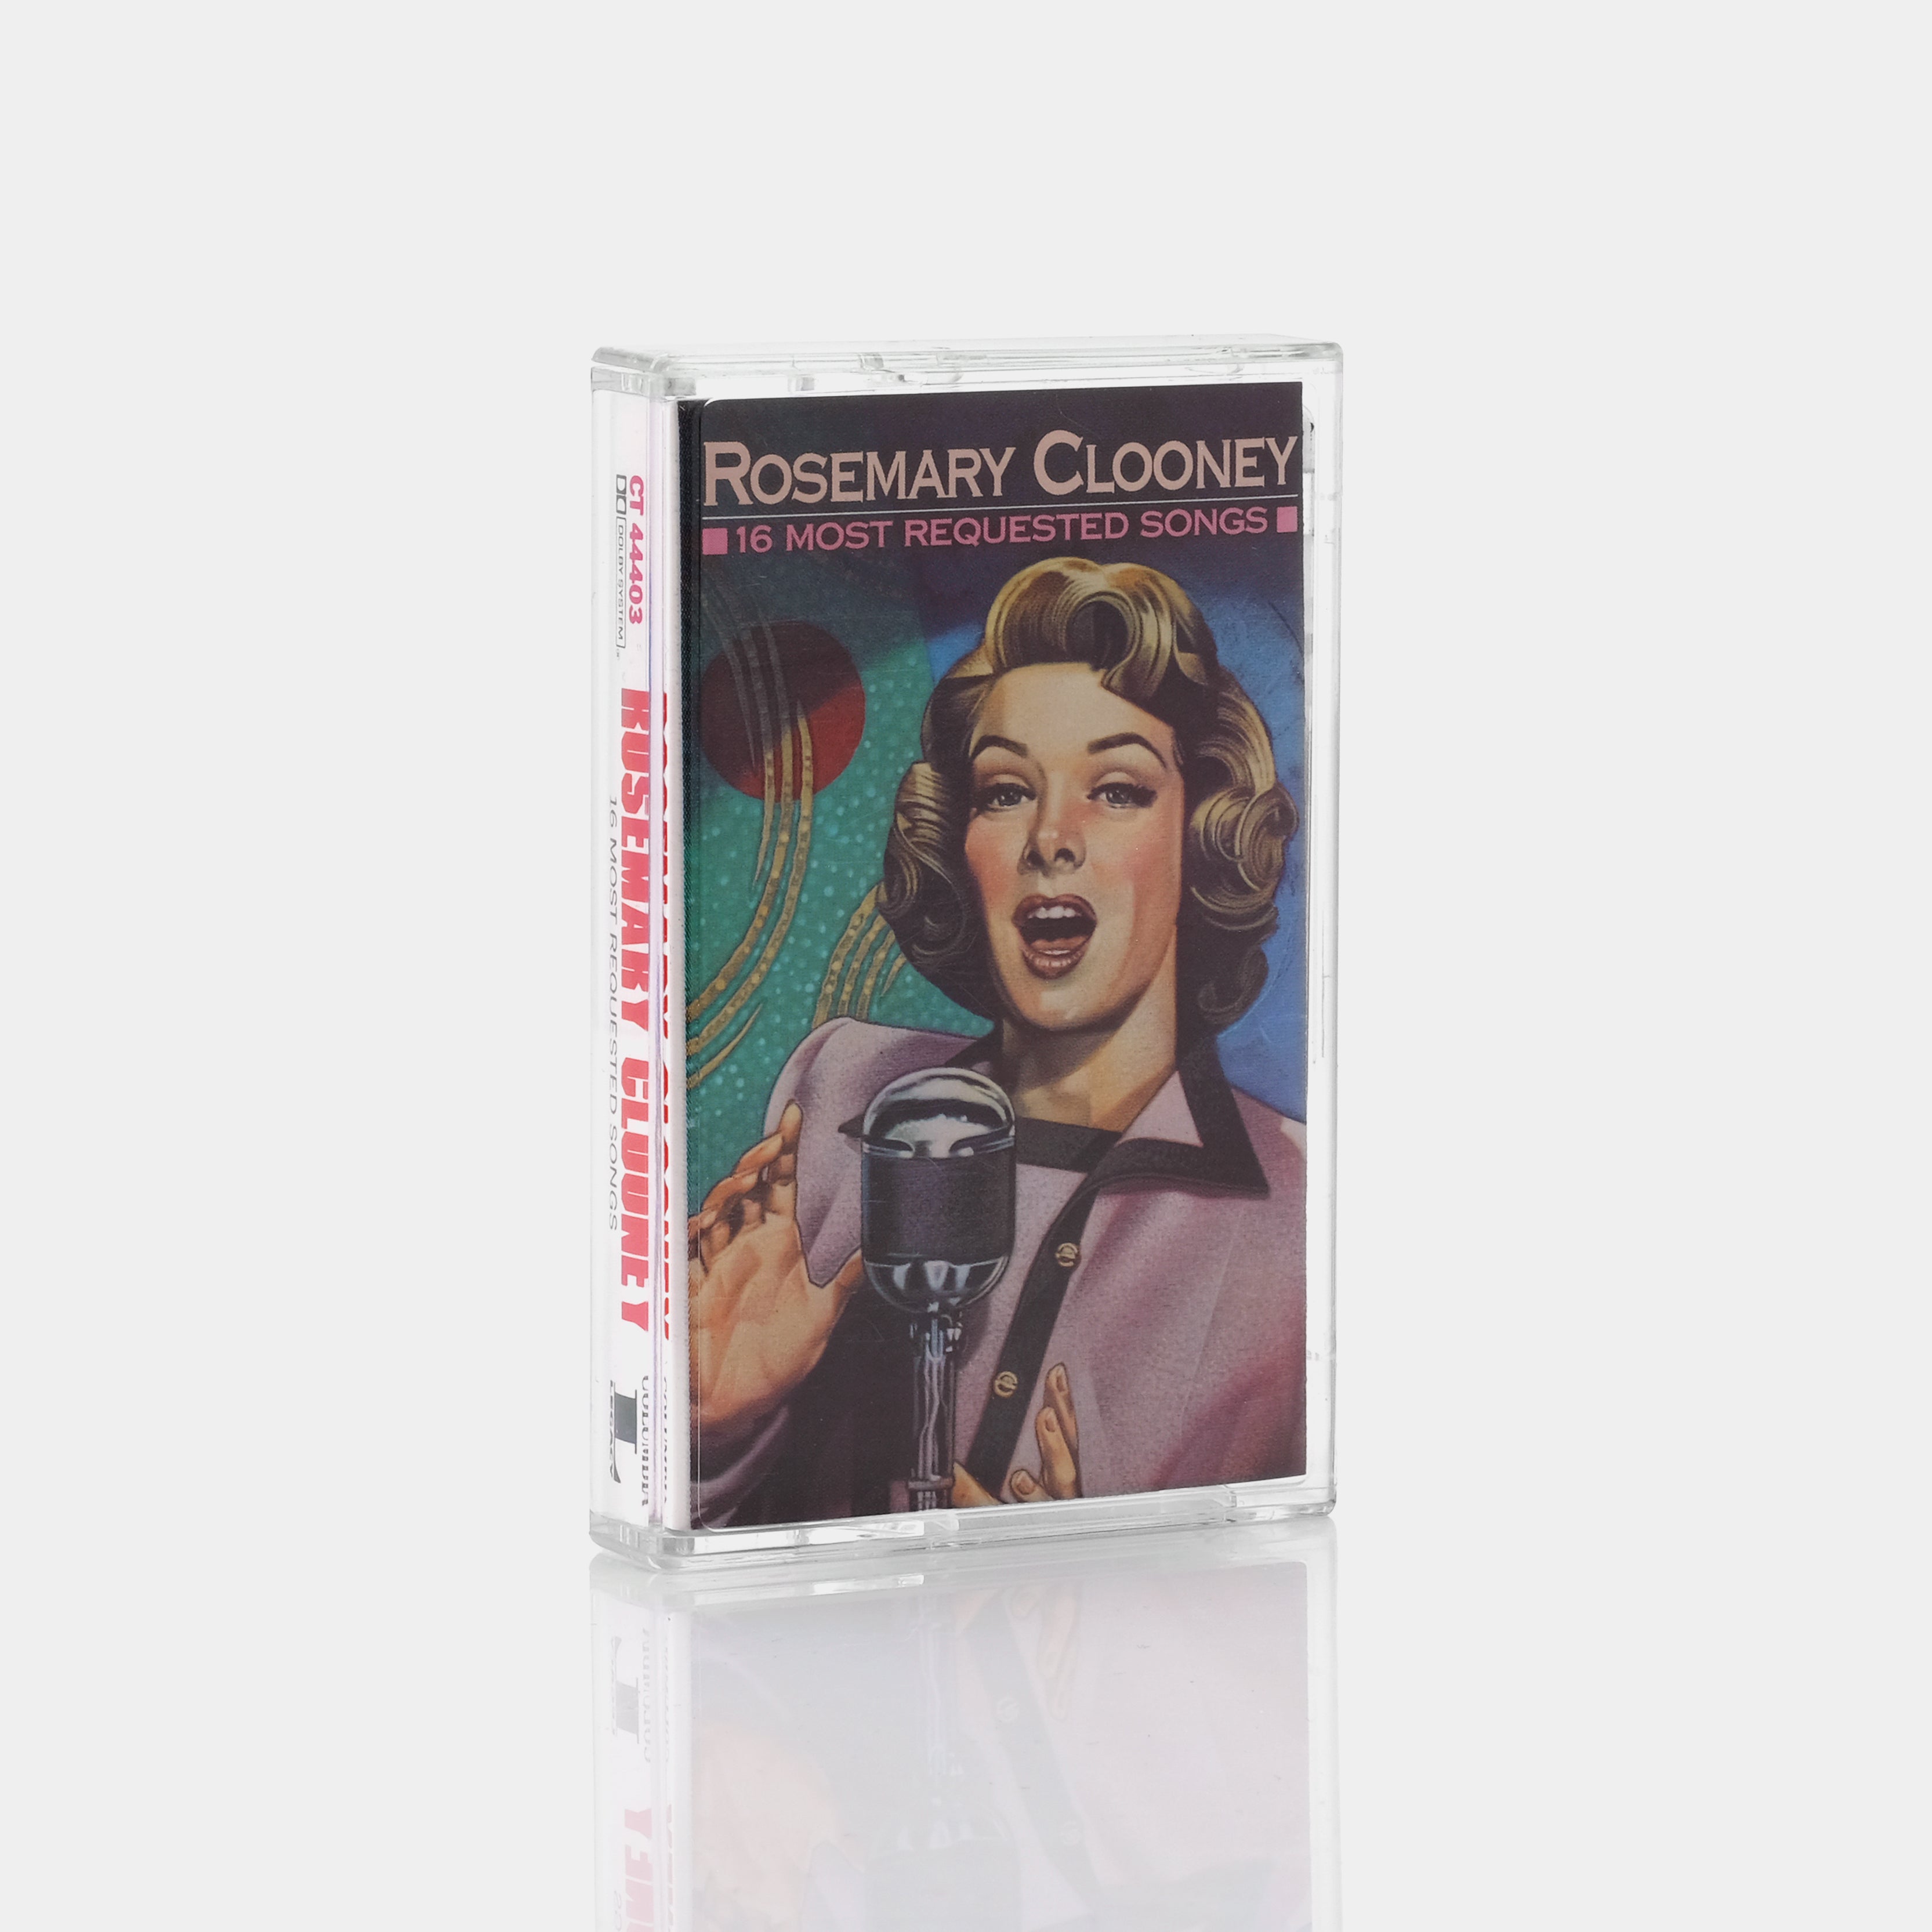 Rosemary Clooney - 16 Most Requested Songs Cassette Tape